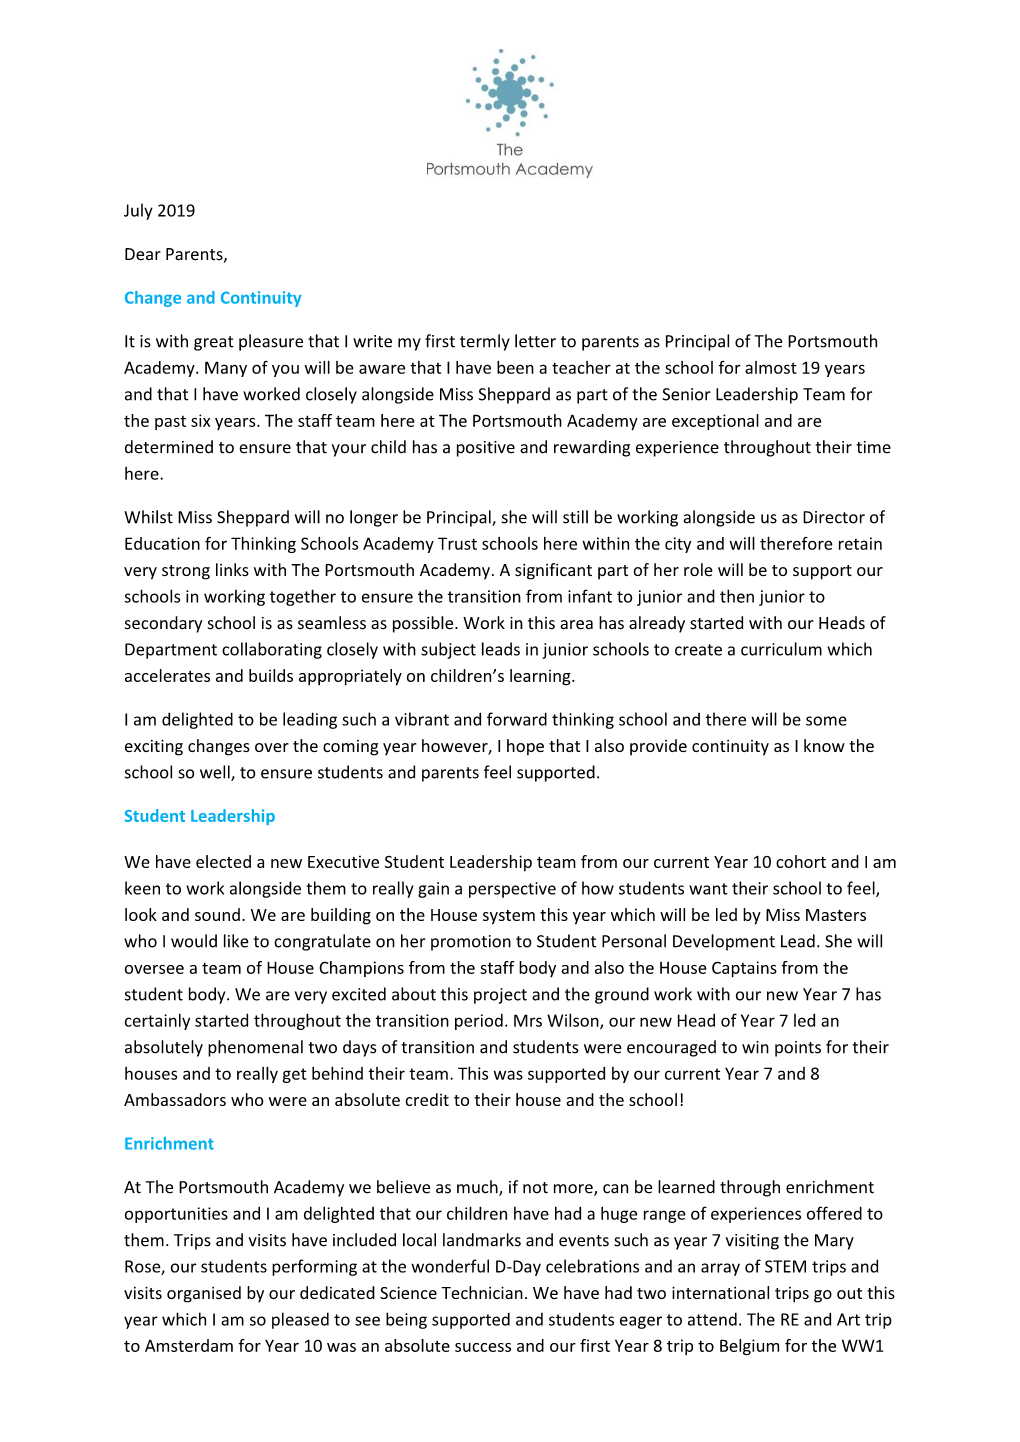 July 2019 Dear Parents, Change and Continuity It Is with Great Pleasure That I Write My First Termly Letter to Parents As Princ